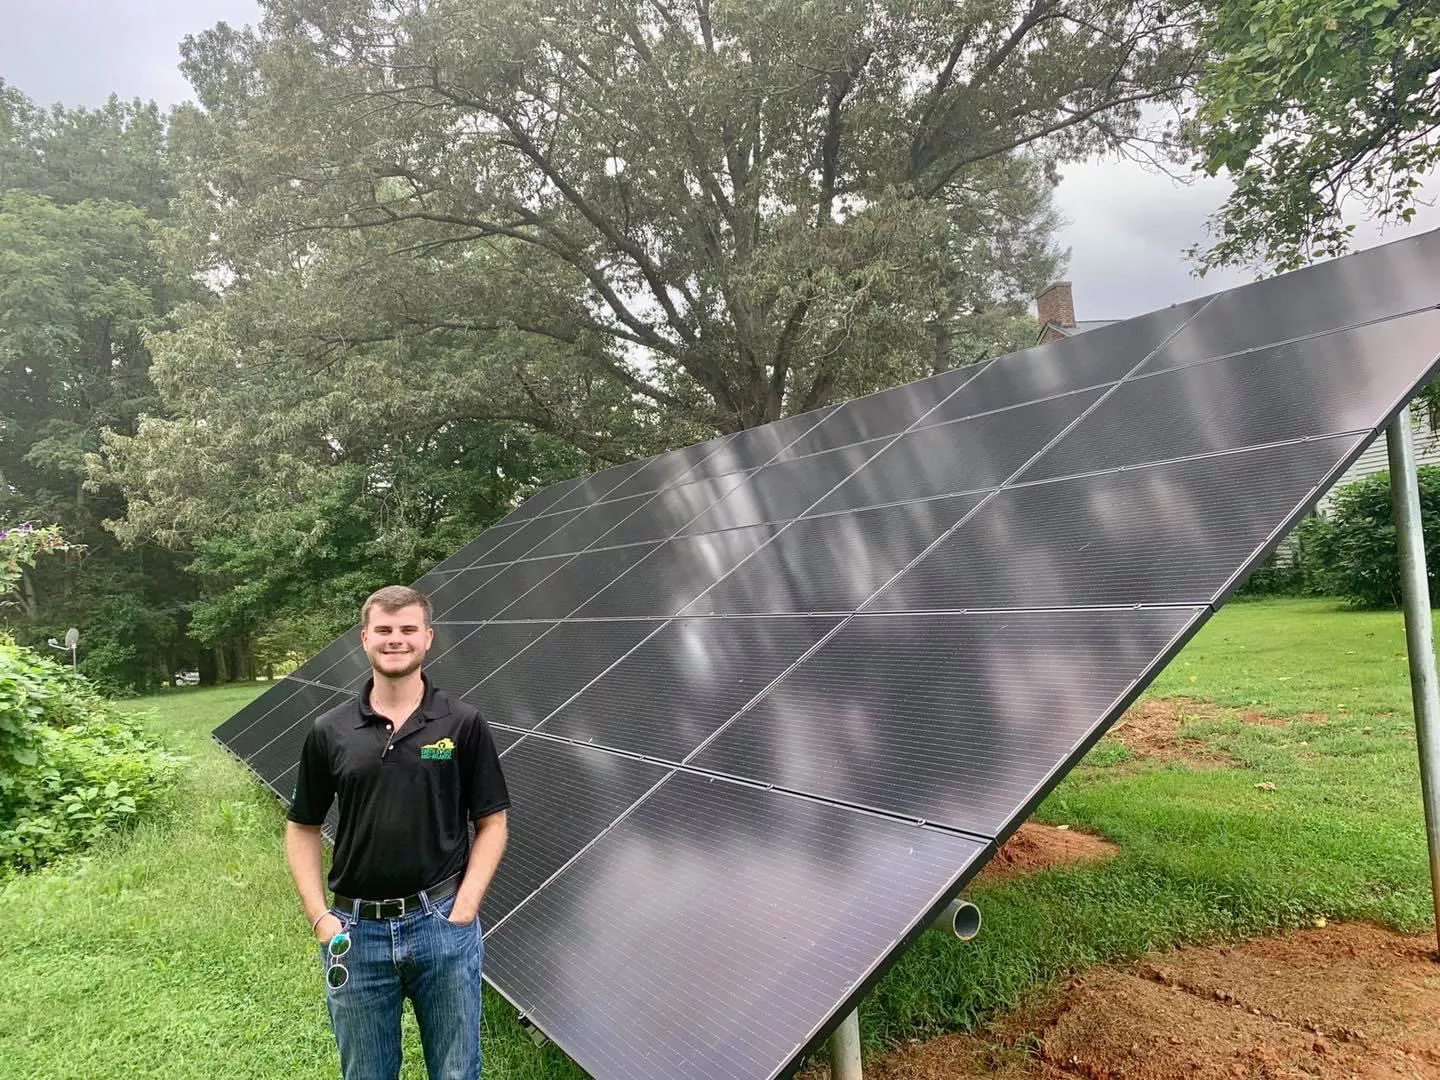 Earth Right Mid Atlantic employee standing in front of ground mounted solar panels